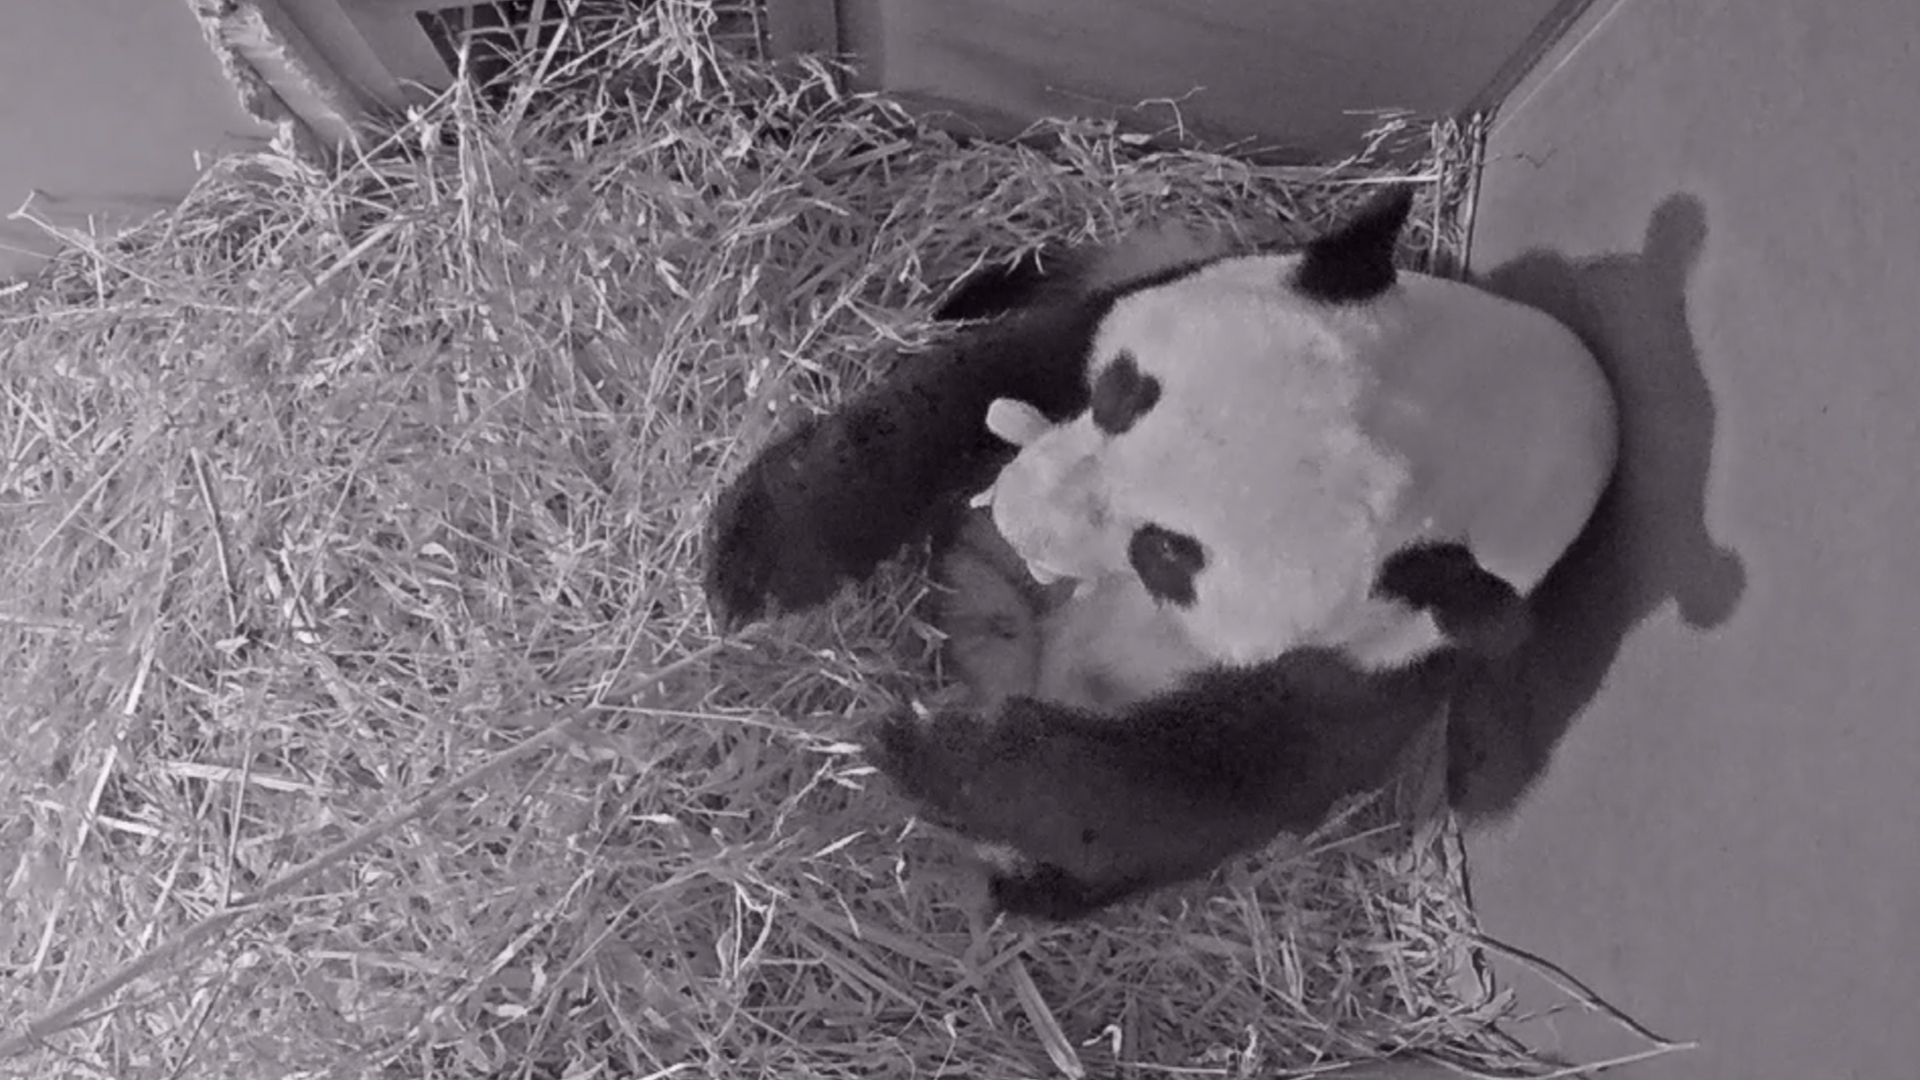 Giant panda Wu Wen holds her newly born cub at Ouwehands Zoo in Rhenen, Netherlands